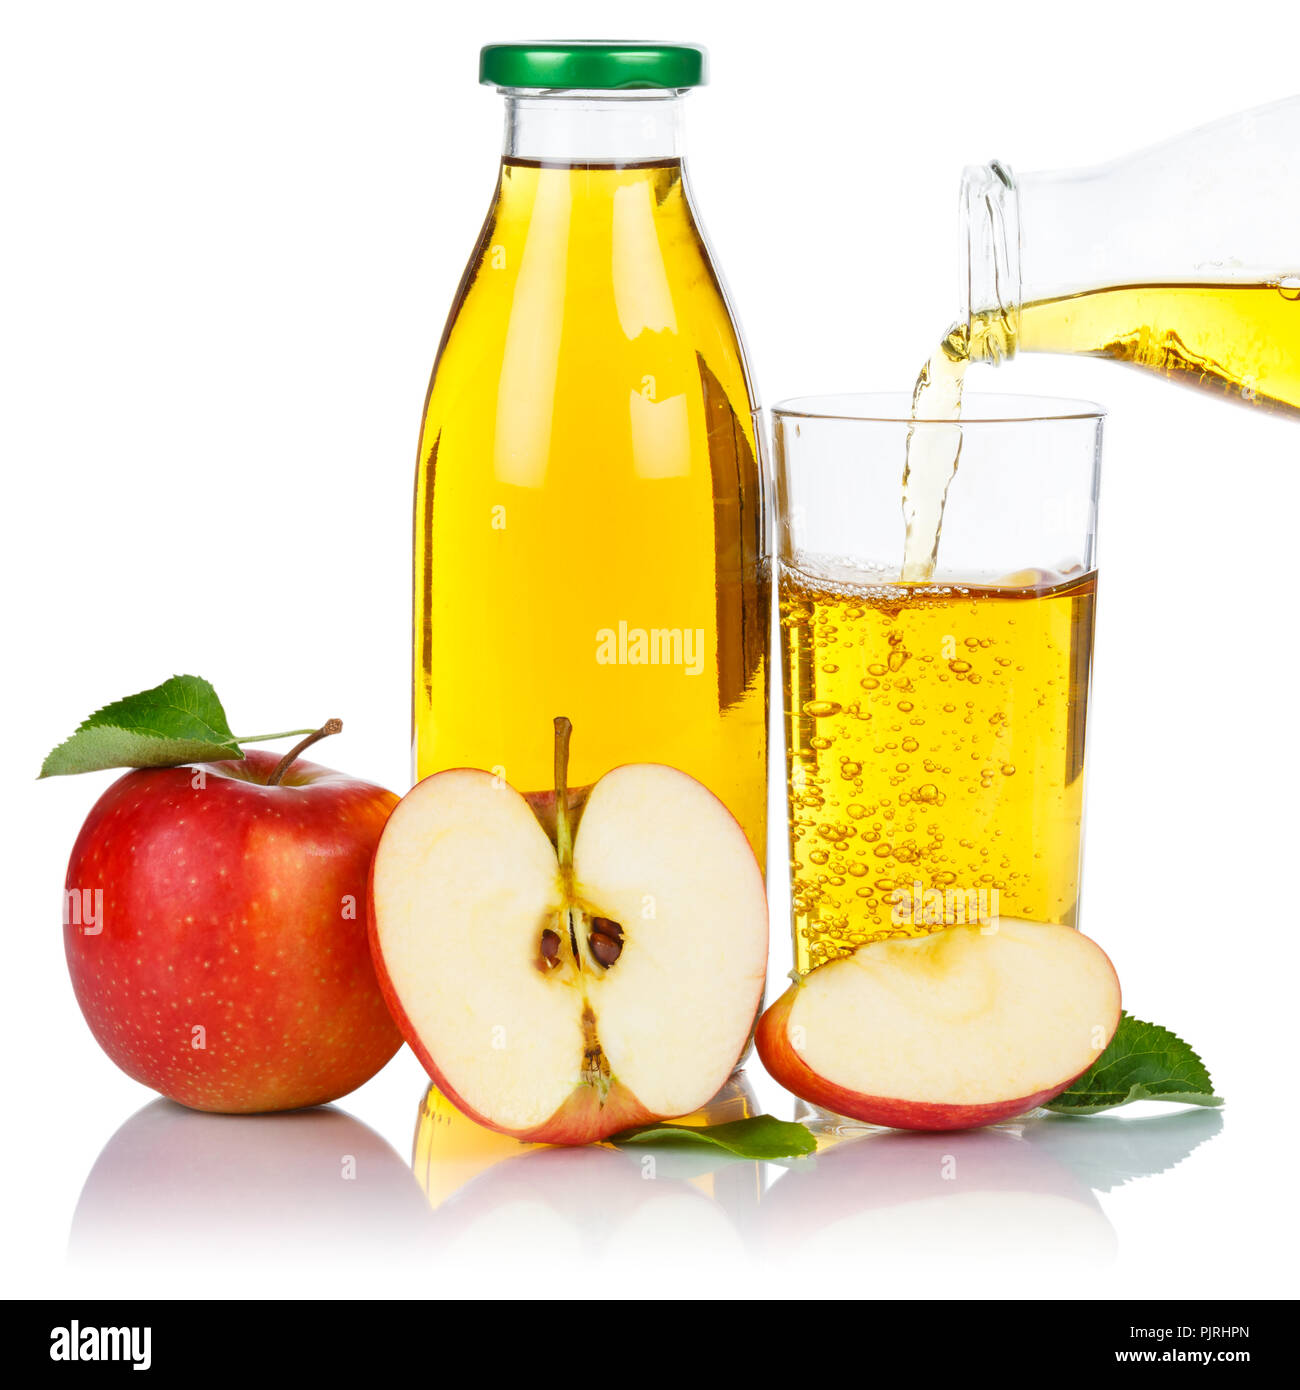 Apple juice pouring apples fruit fruits glass bottle square isolated on a white background Stock Photo